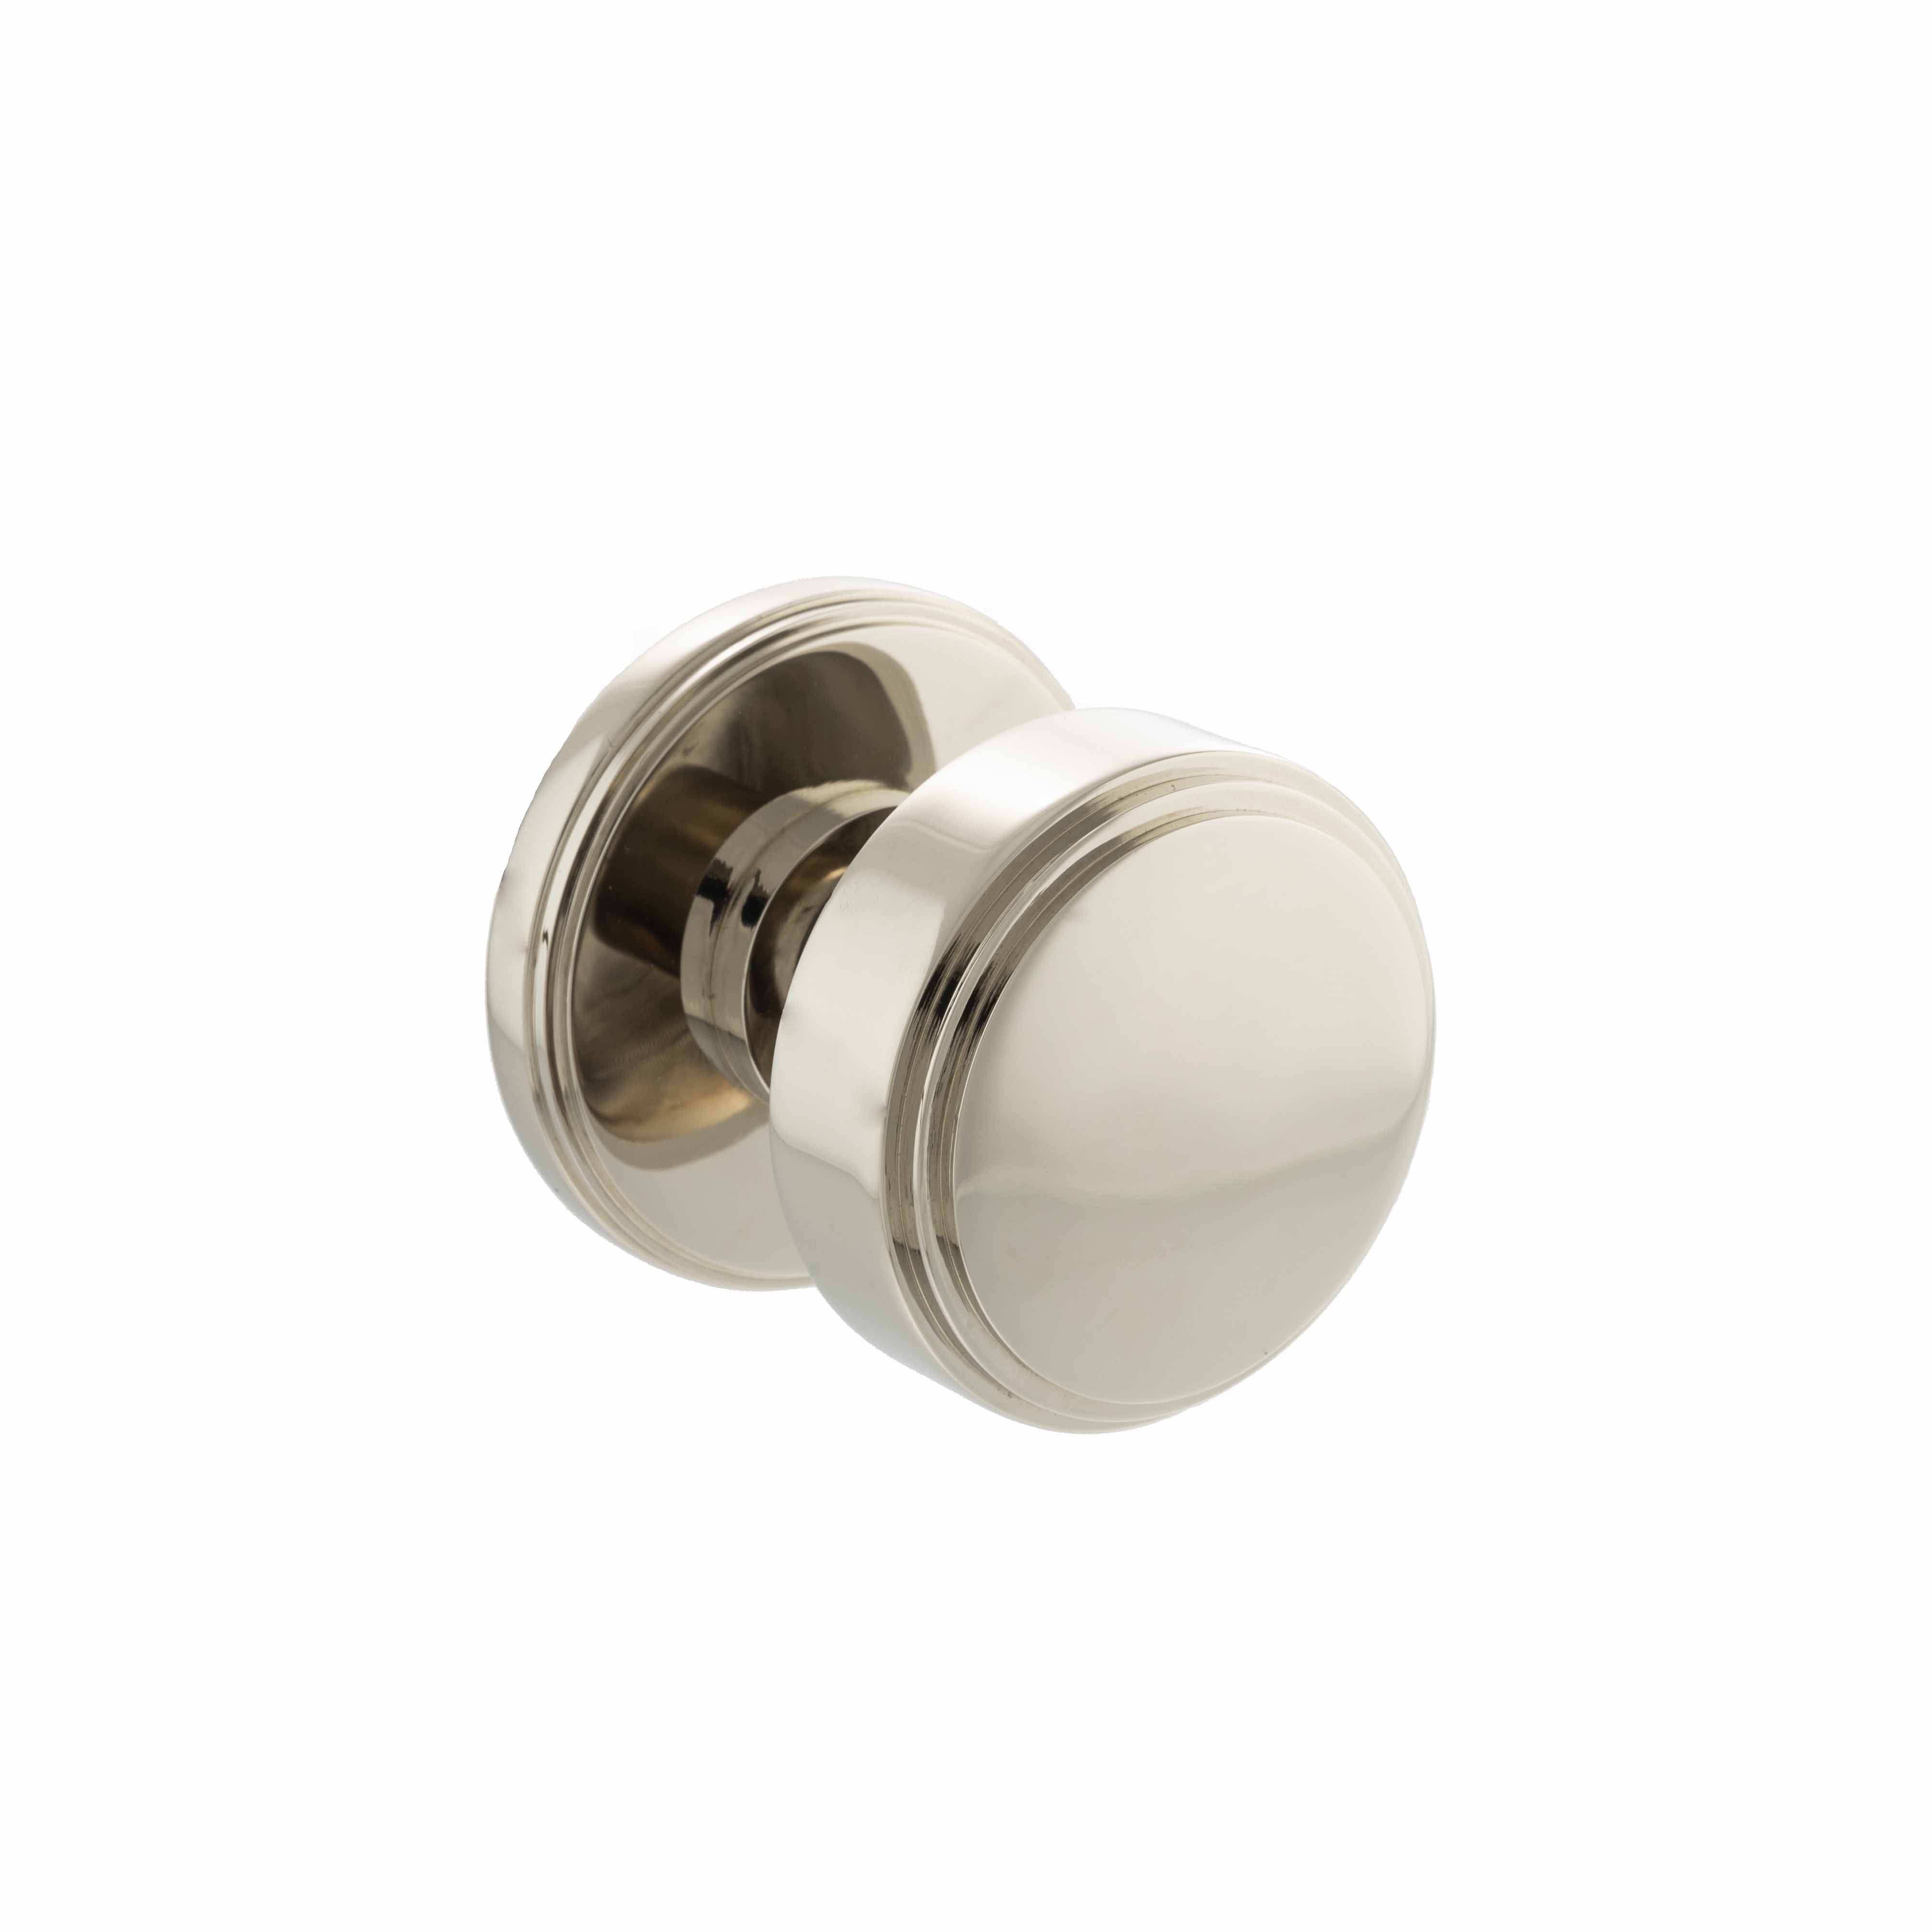 Millhouse Brass Boulton Solid Brass Stepped Mortice Knob on Concealed Fix Rose - Polished Nickel